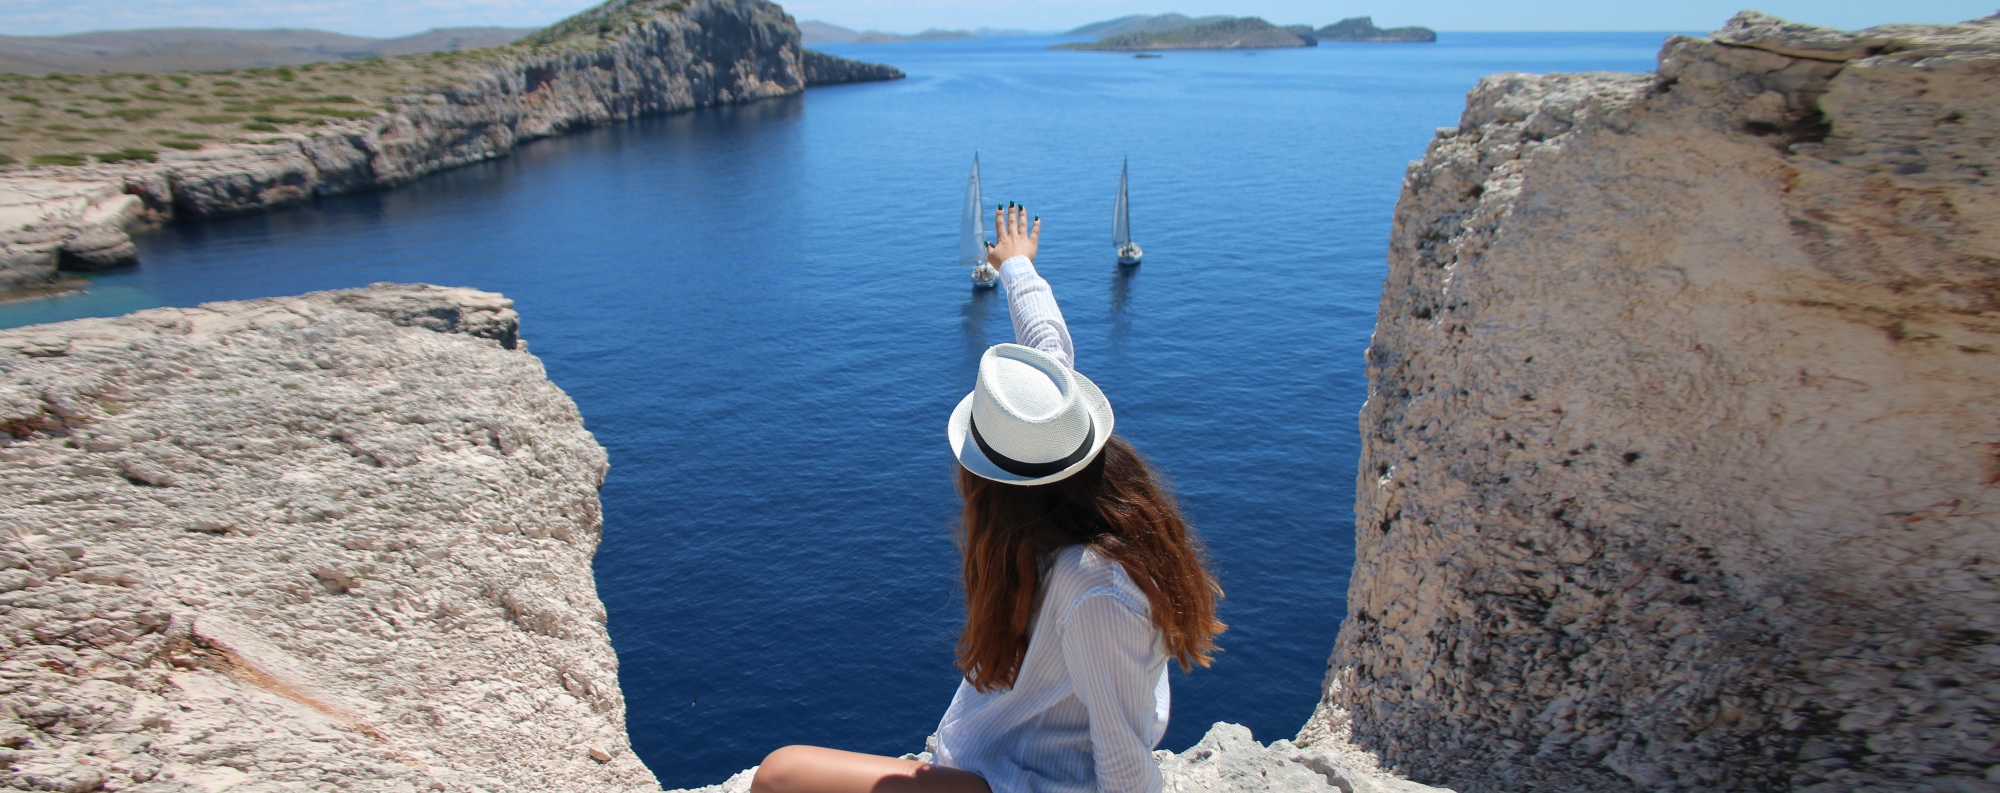 kornati islands and telašćica private boat tour girl on a cliff enjoying view